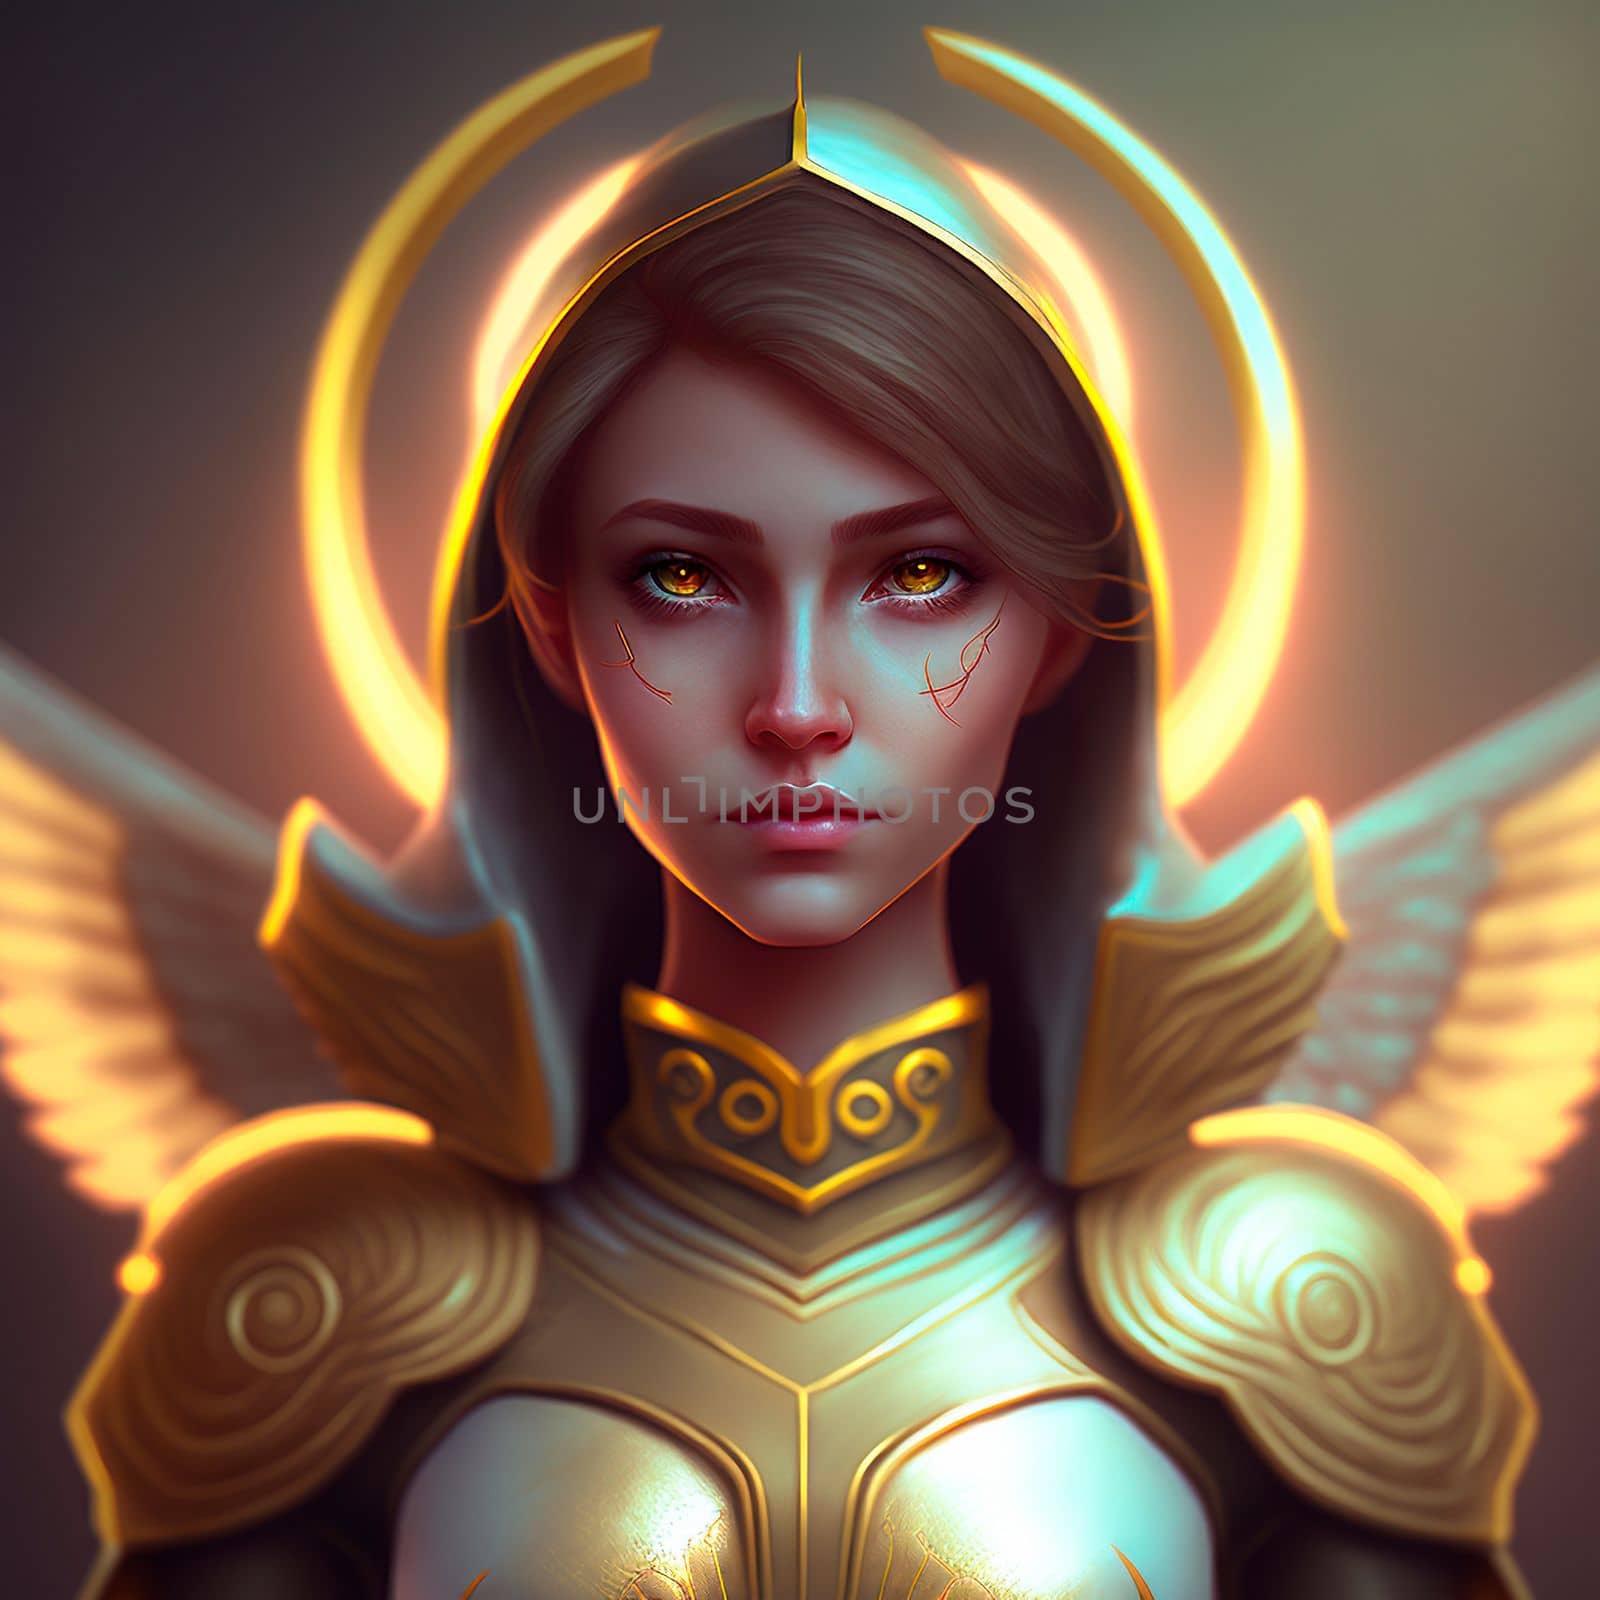 Mysterious angel woman with a halo and golden armor by NeuroSky